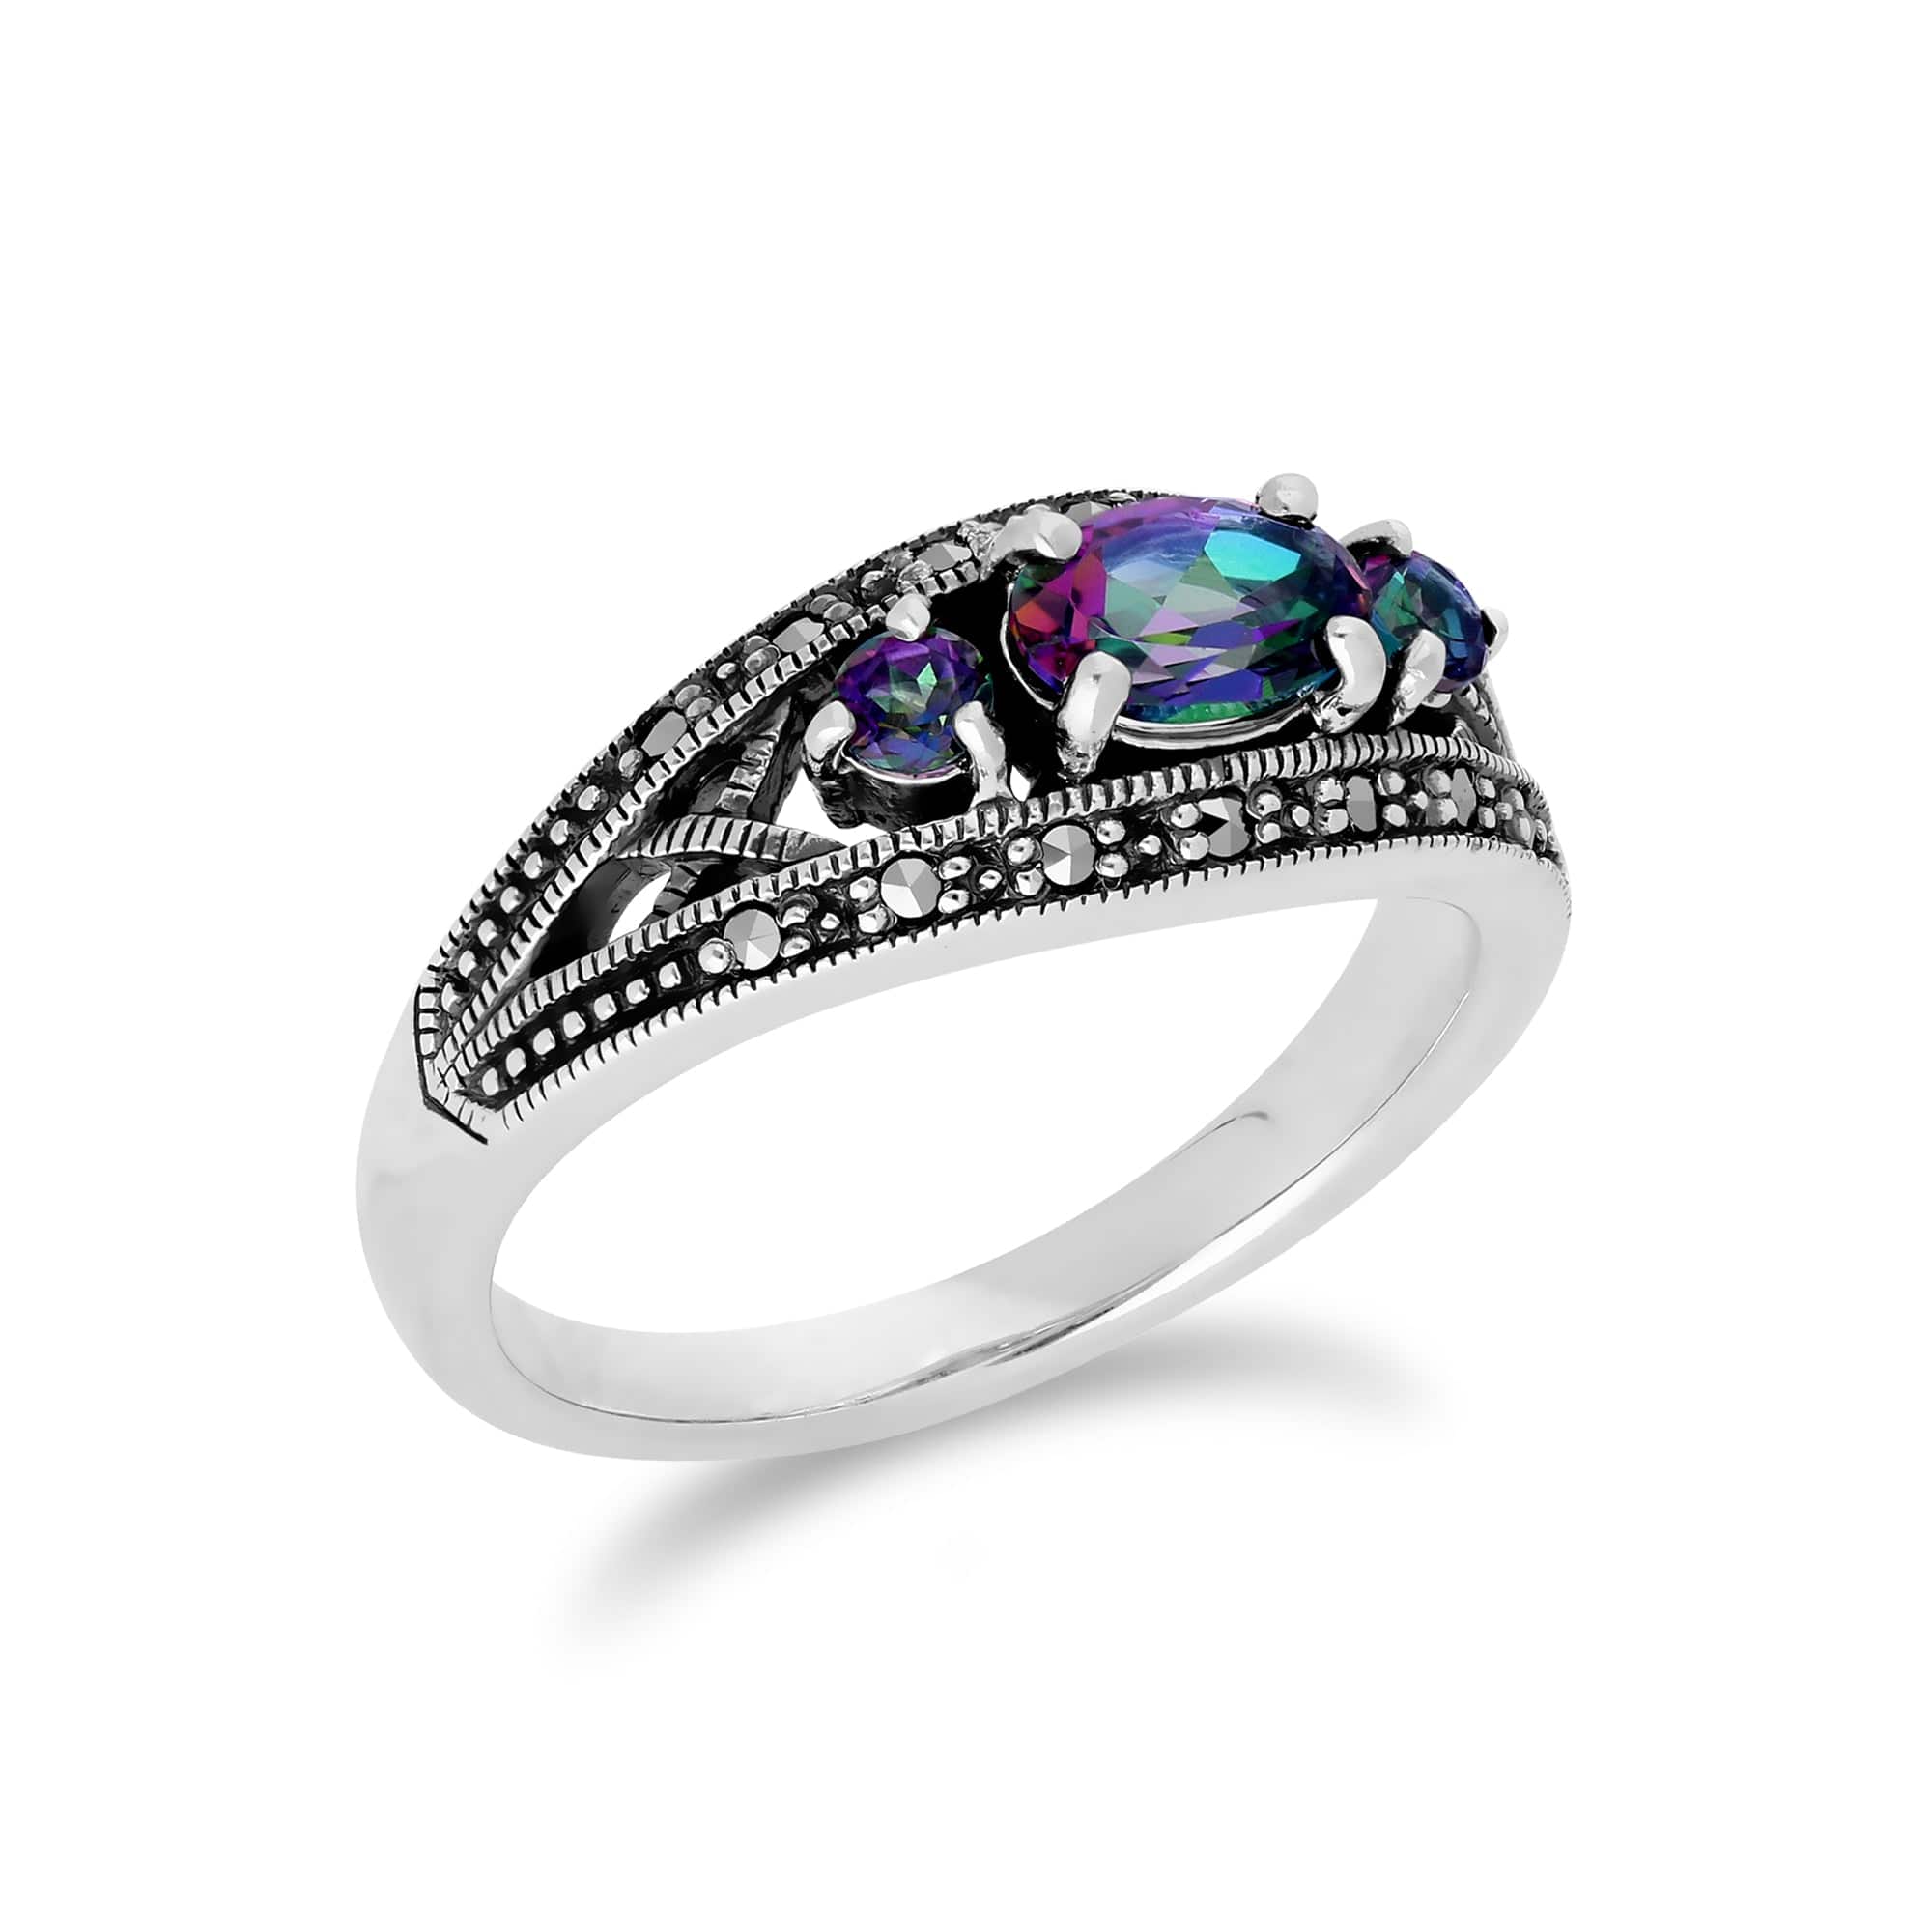 214R424004925 Art Deco Style Oval Mystic Topaz & Marcasite Three Stone Ring in 925 Sterling Silver 2